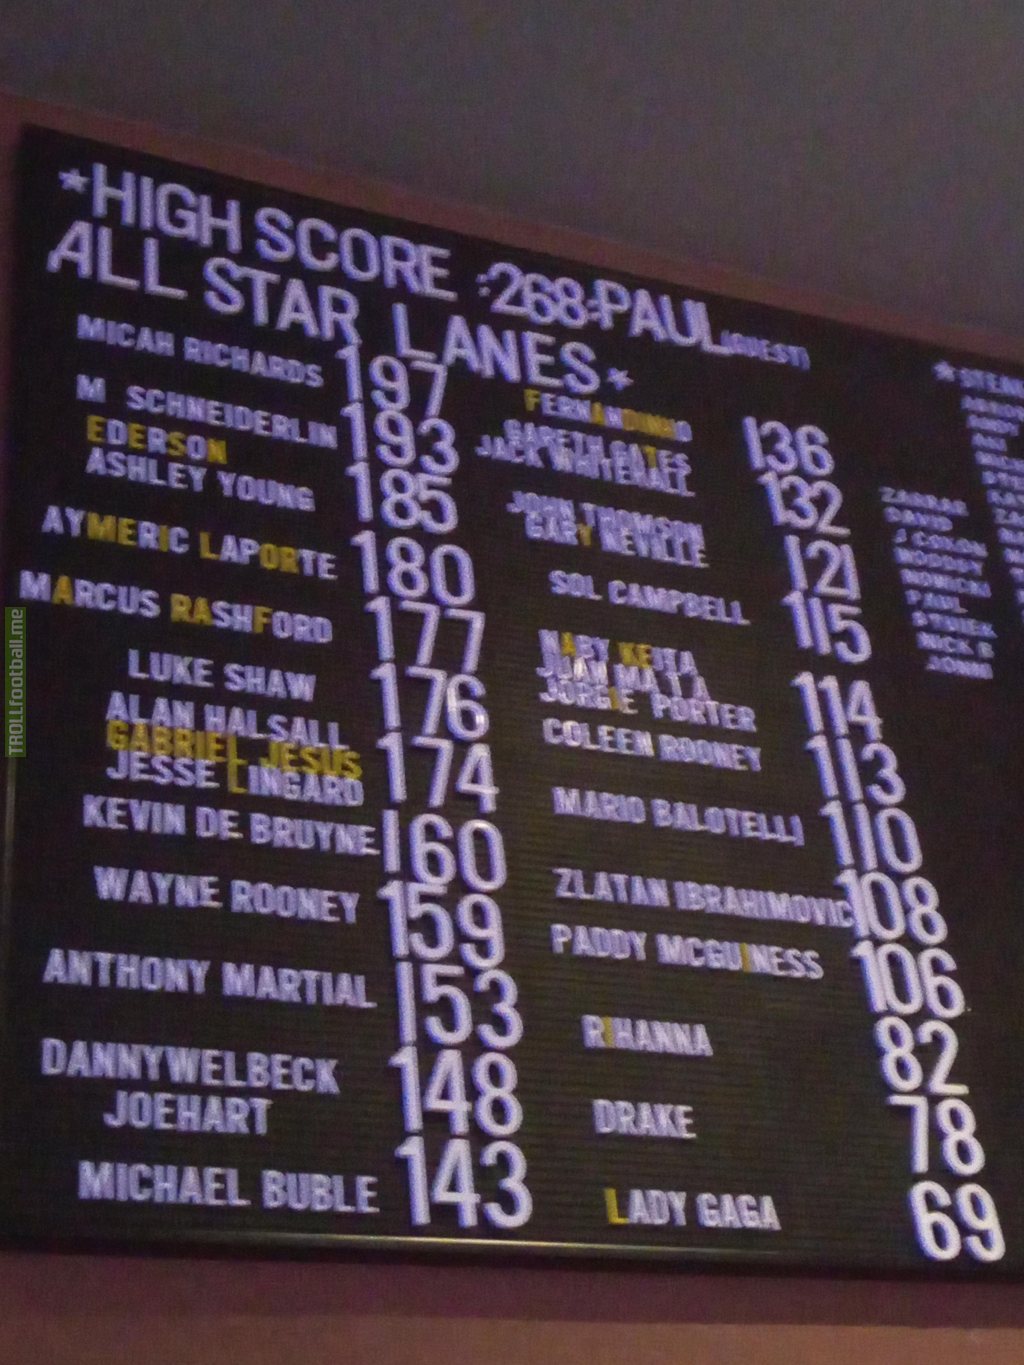 Famous Manchester players and random celebrities top bowling scores at a bar in the city.